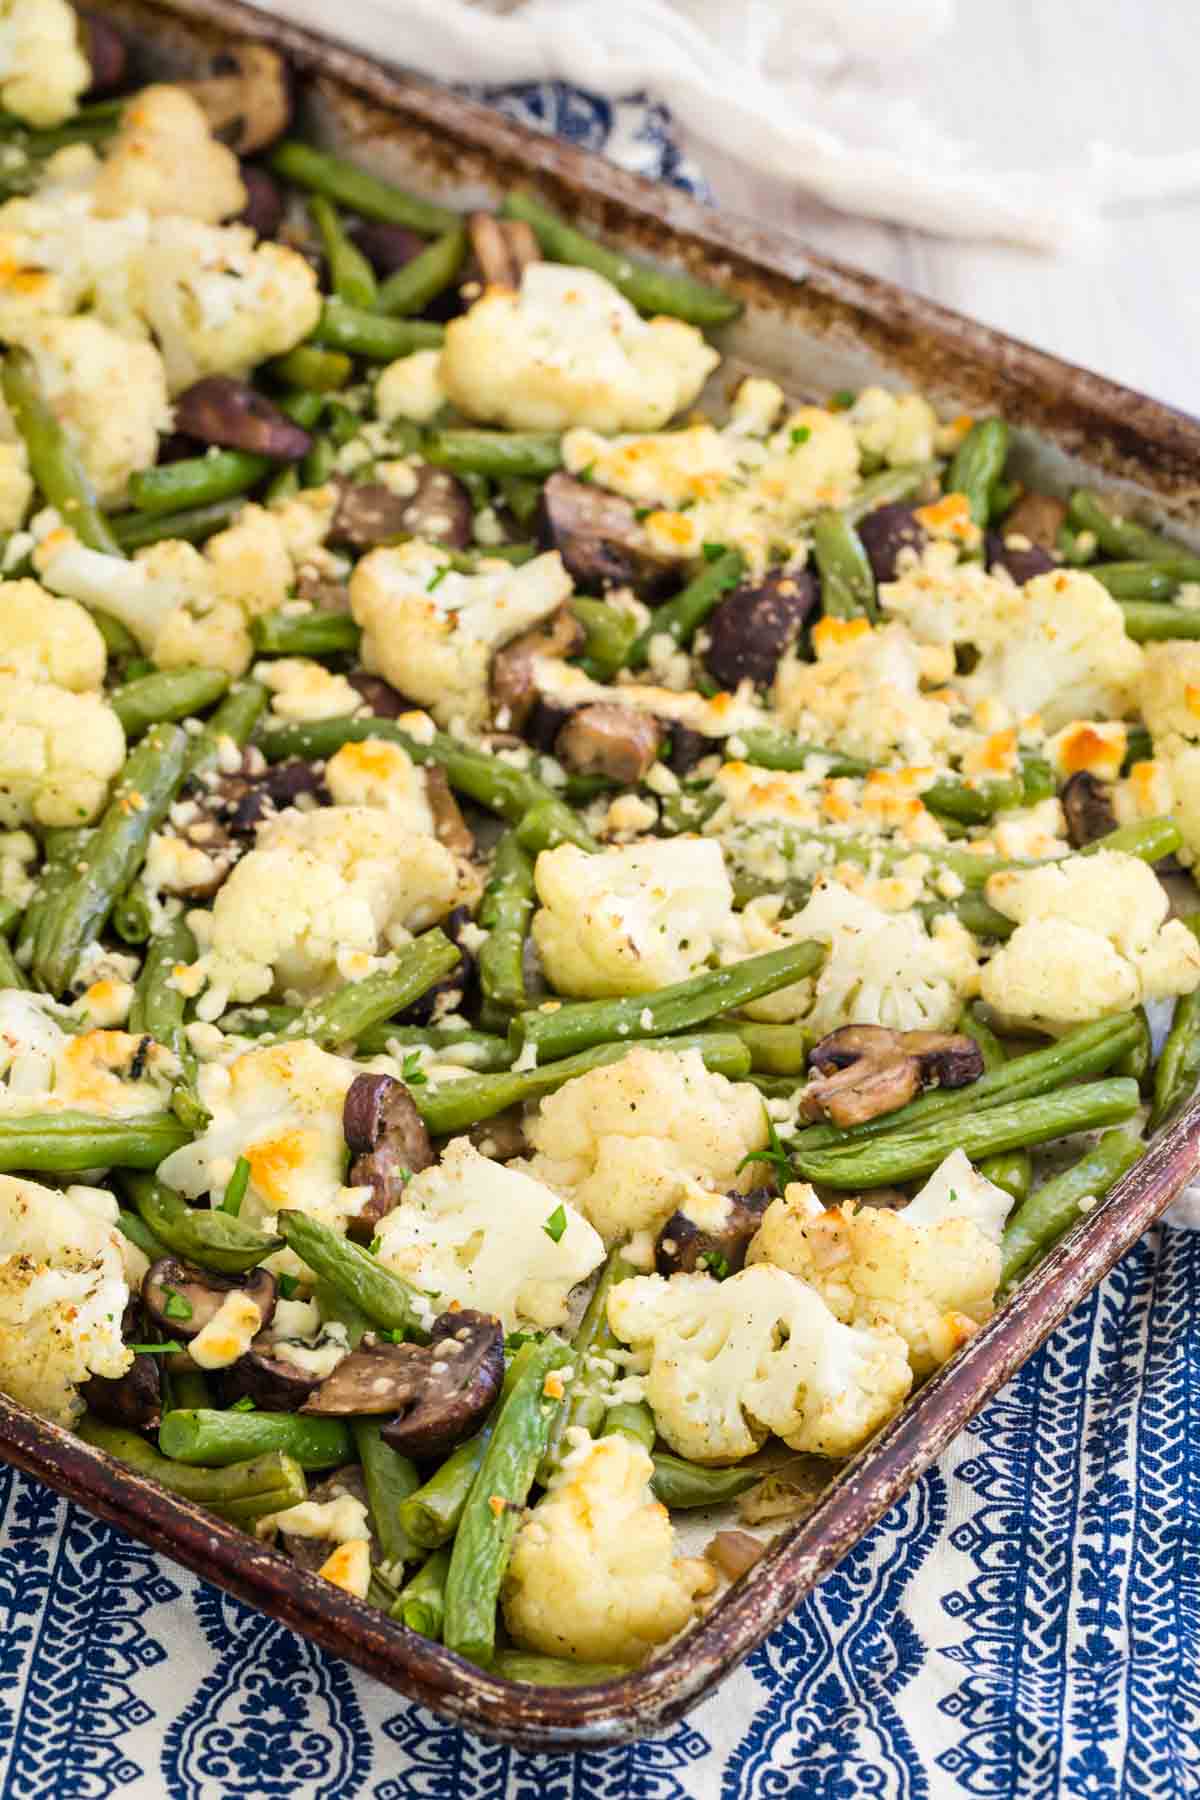 Blue cheese roasted vegetables including green beans and mushrooms are shown after the oven on a metal baking sheets.